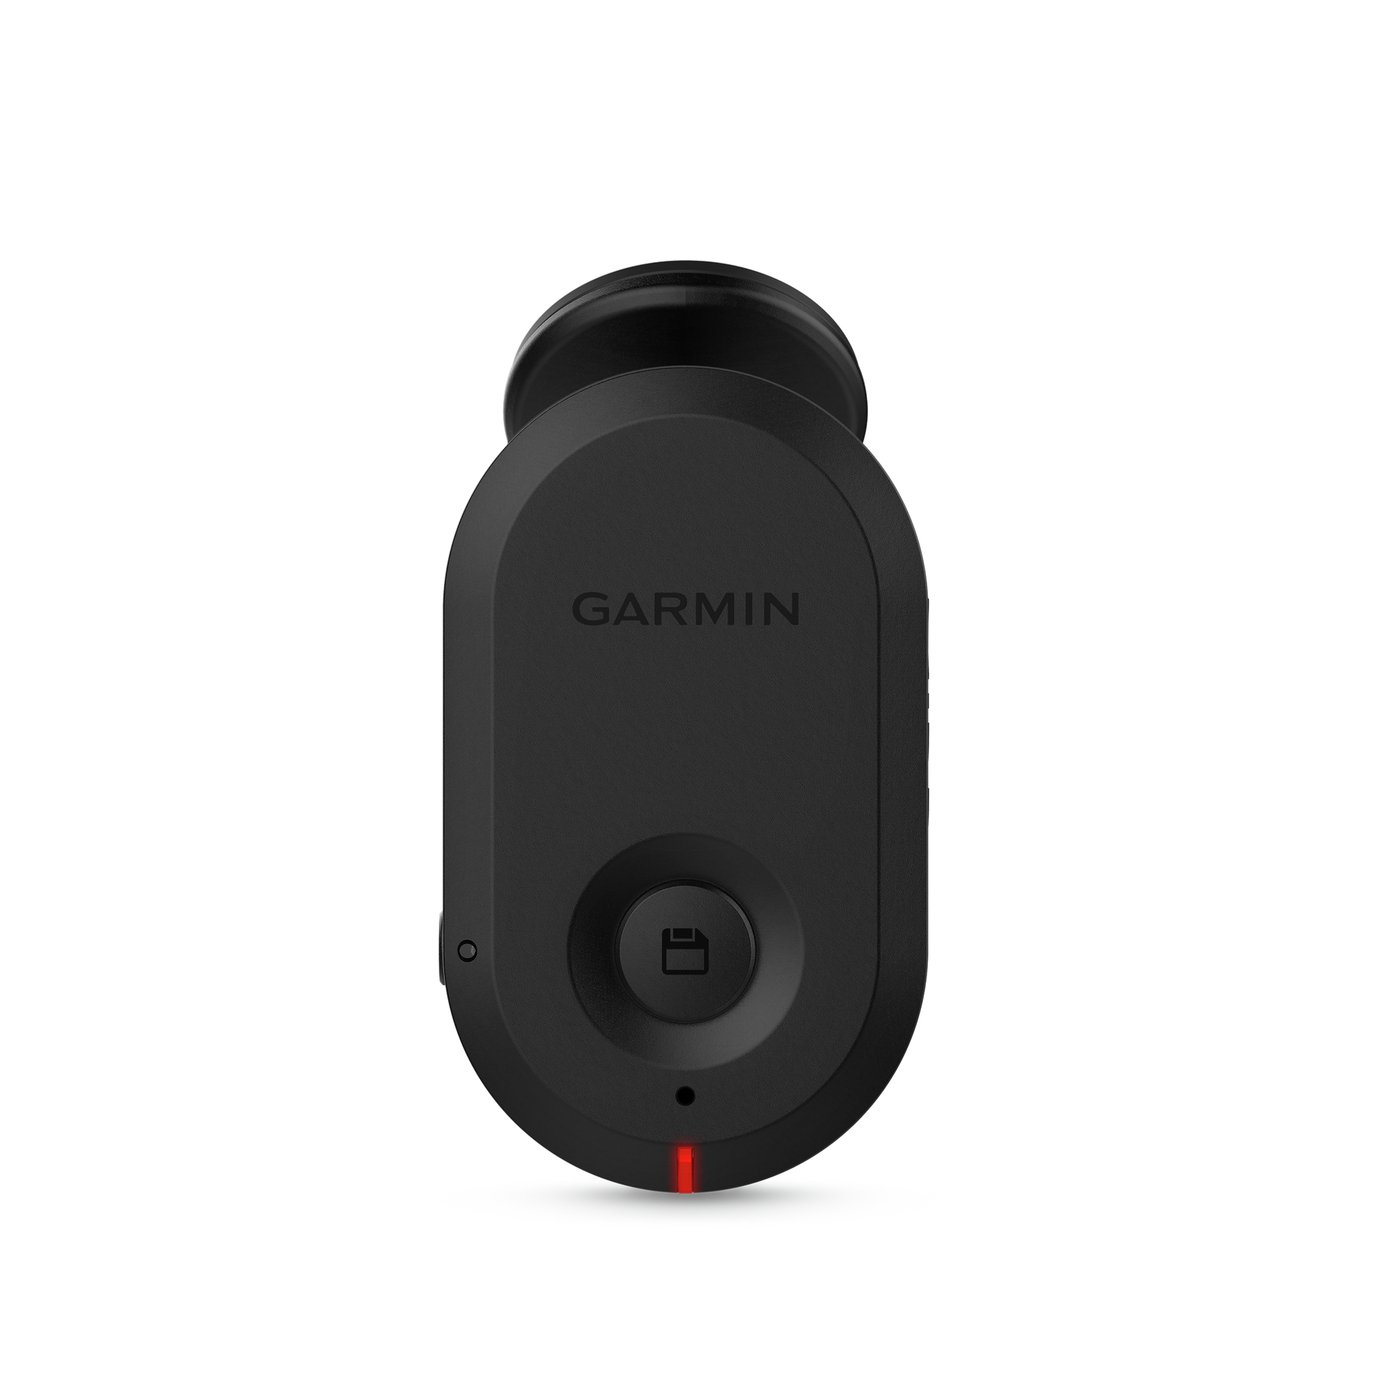 Garmin Dash Cam Mini with Charger Review